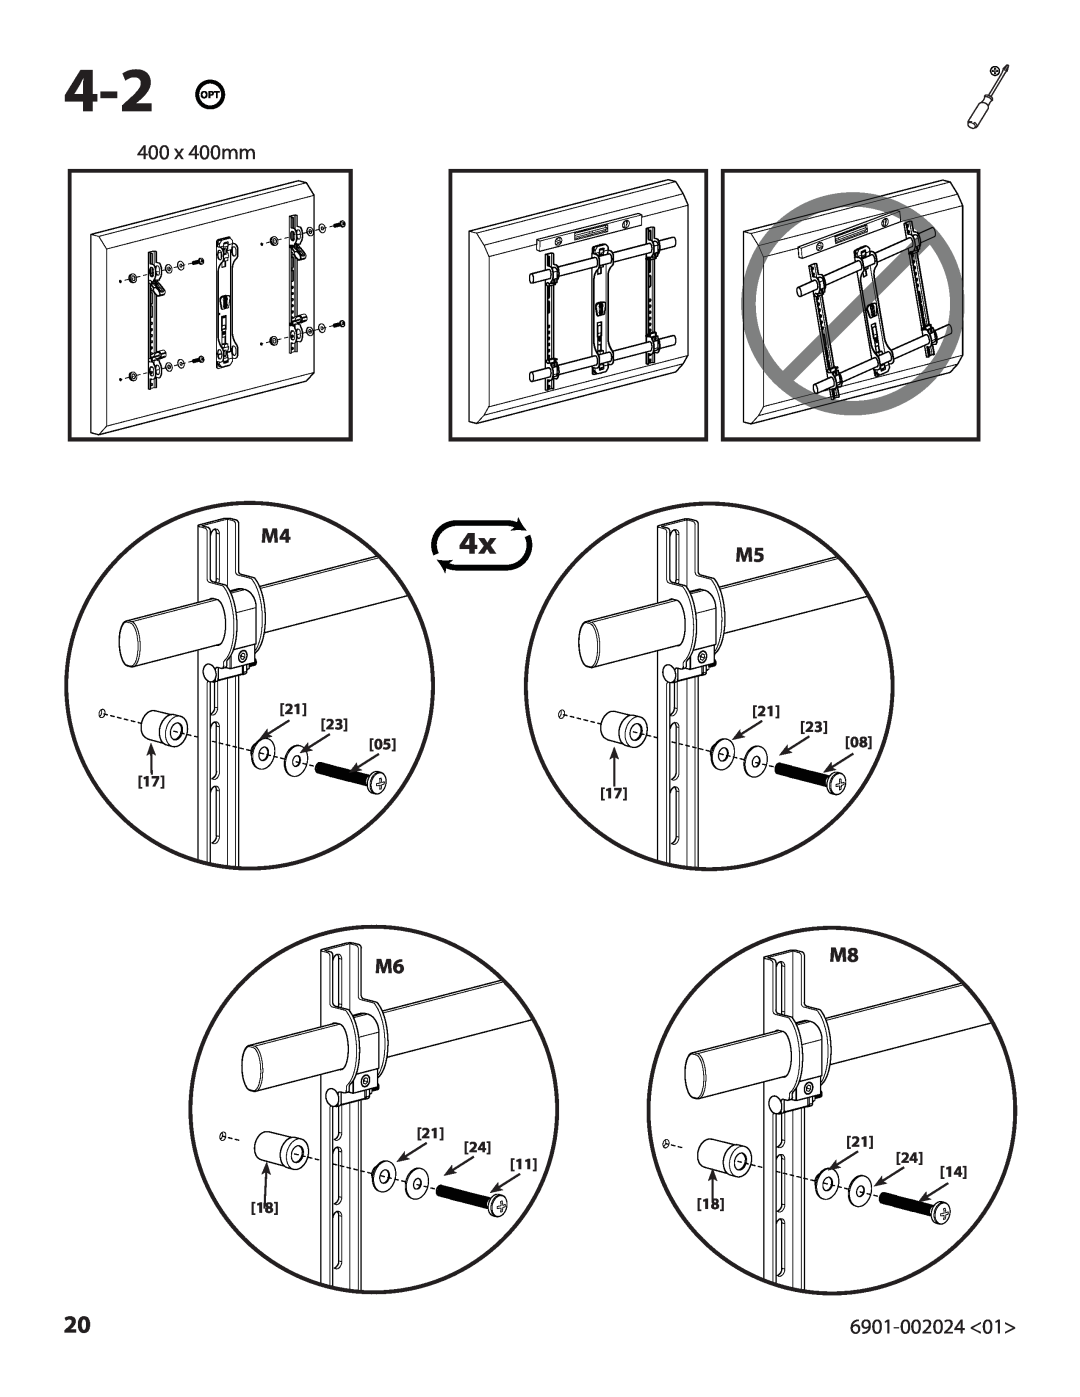 Sanus Systems VLF210 important safety instructions 400 x 400mm, 6901-002024<01>, 21 05 17, 21 23 08 